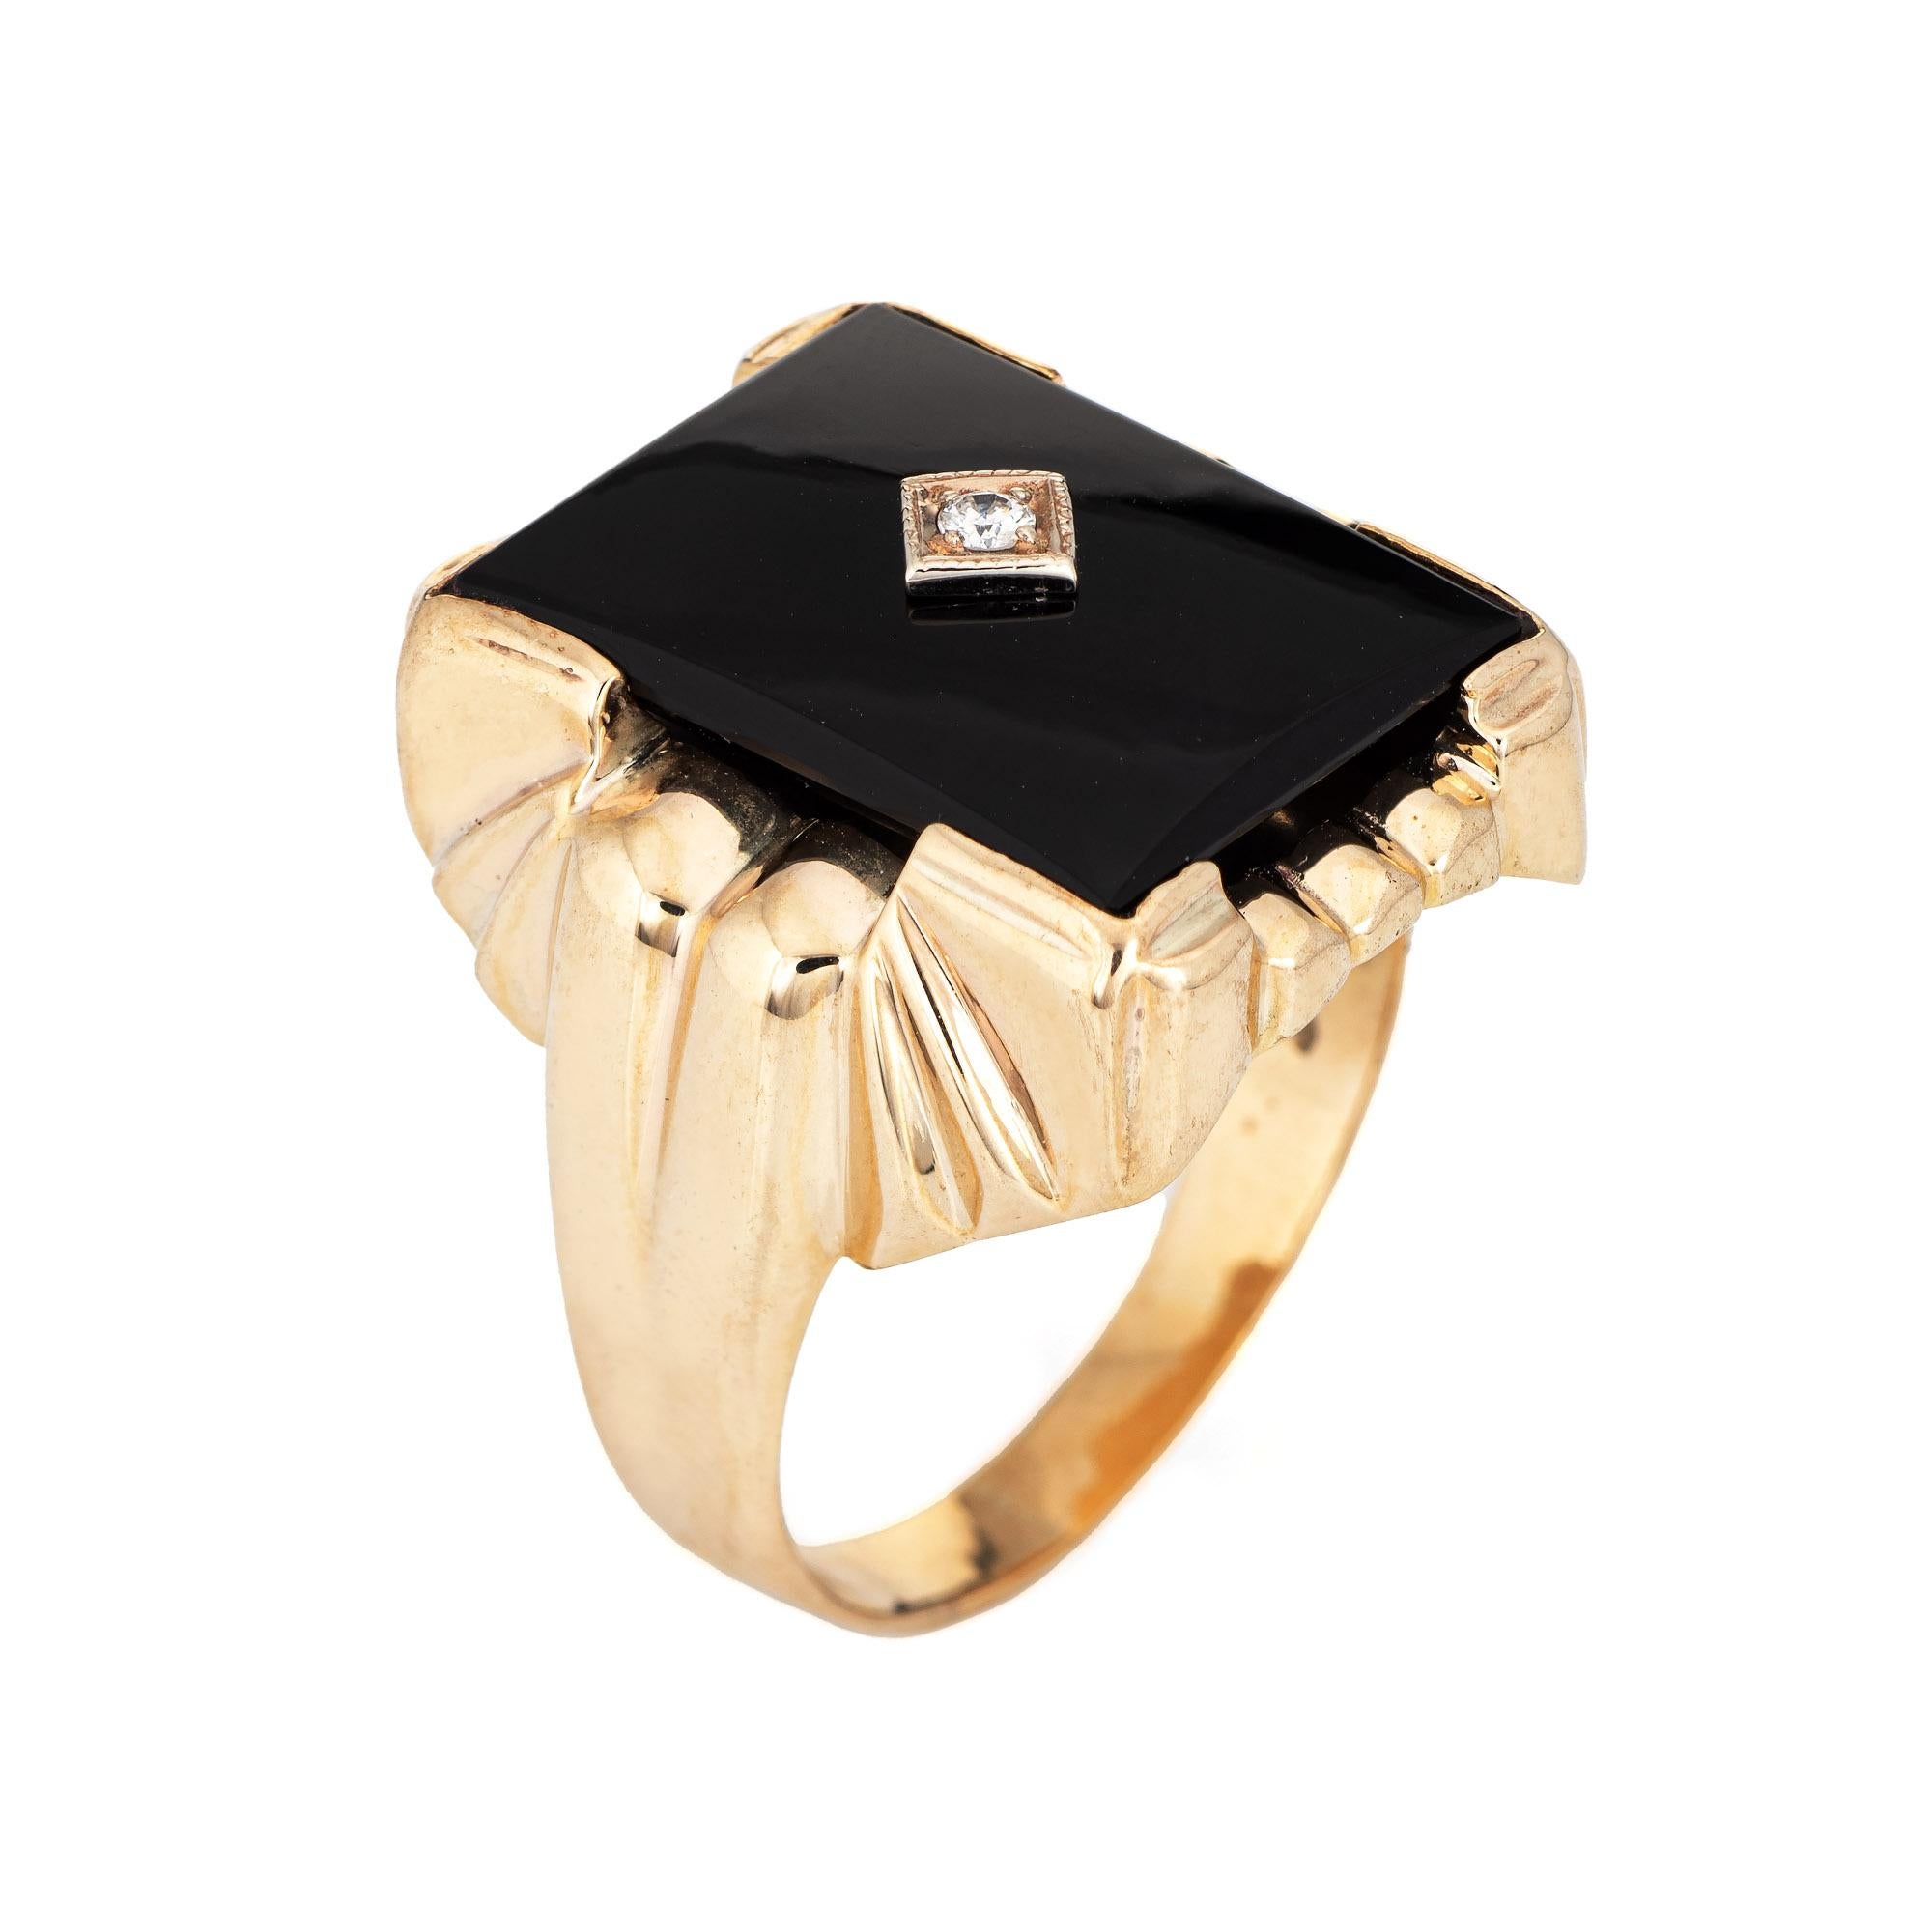 Stylish vintage onyx & diamond ring (circa 1960s to 1970s) crafted in 10 karat yellow gold. 

Black onyx measures 20mm x 15mm (in very good condition and free of cracks or chips). The diamond is estimated at 0.04 carats (estimated at I-J color and